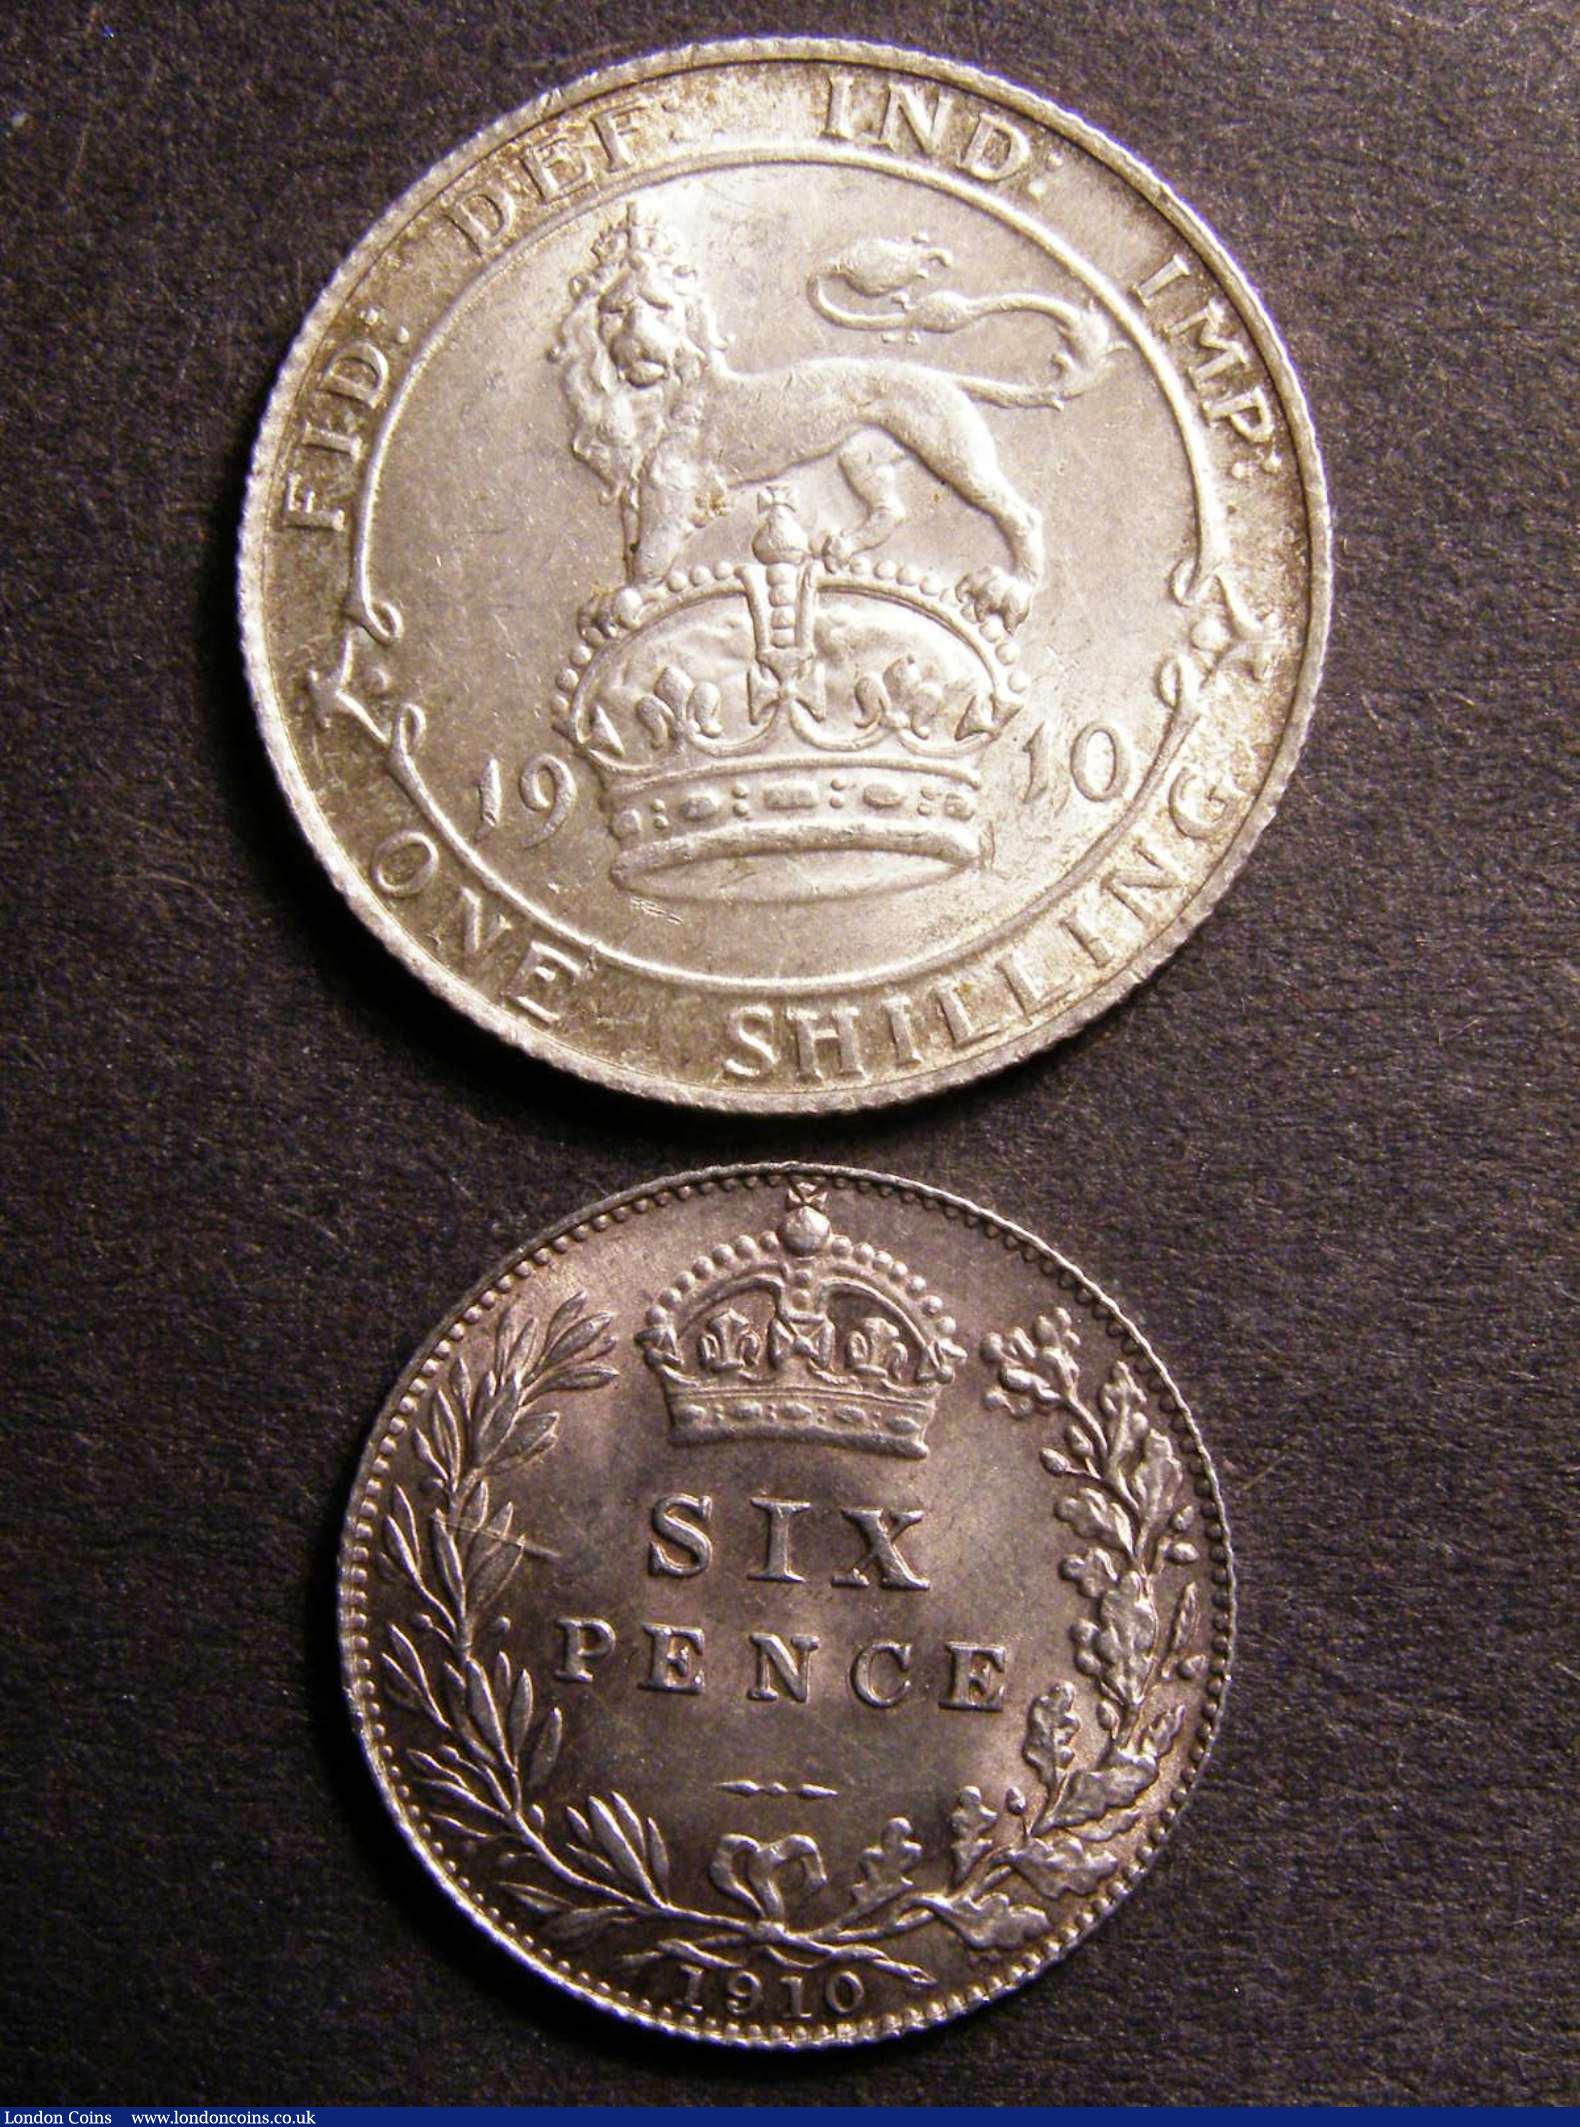 Shilling 1910 ESC 1419, Sixpence 1910 ESC 1794 both A/UNC the Shilling with a pleasant tone : English Coins : Auction 128 : Lot 1697